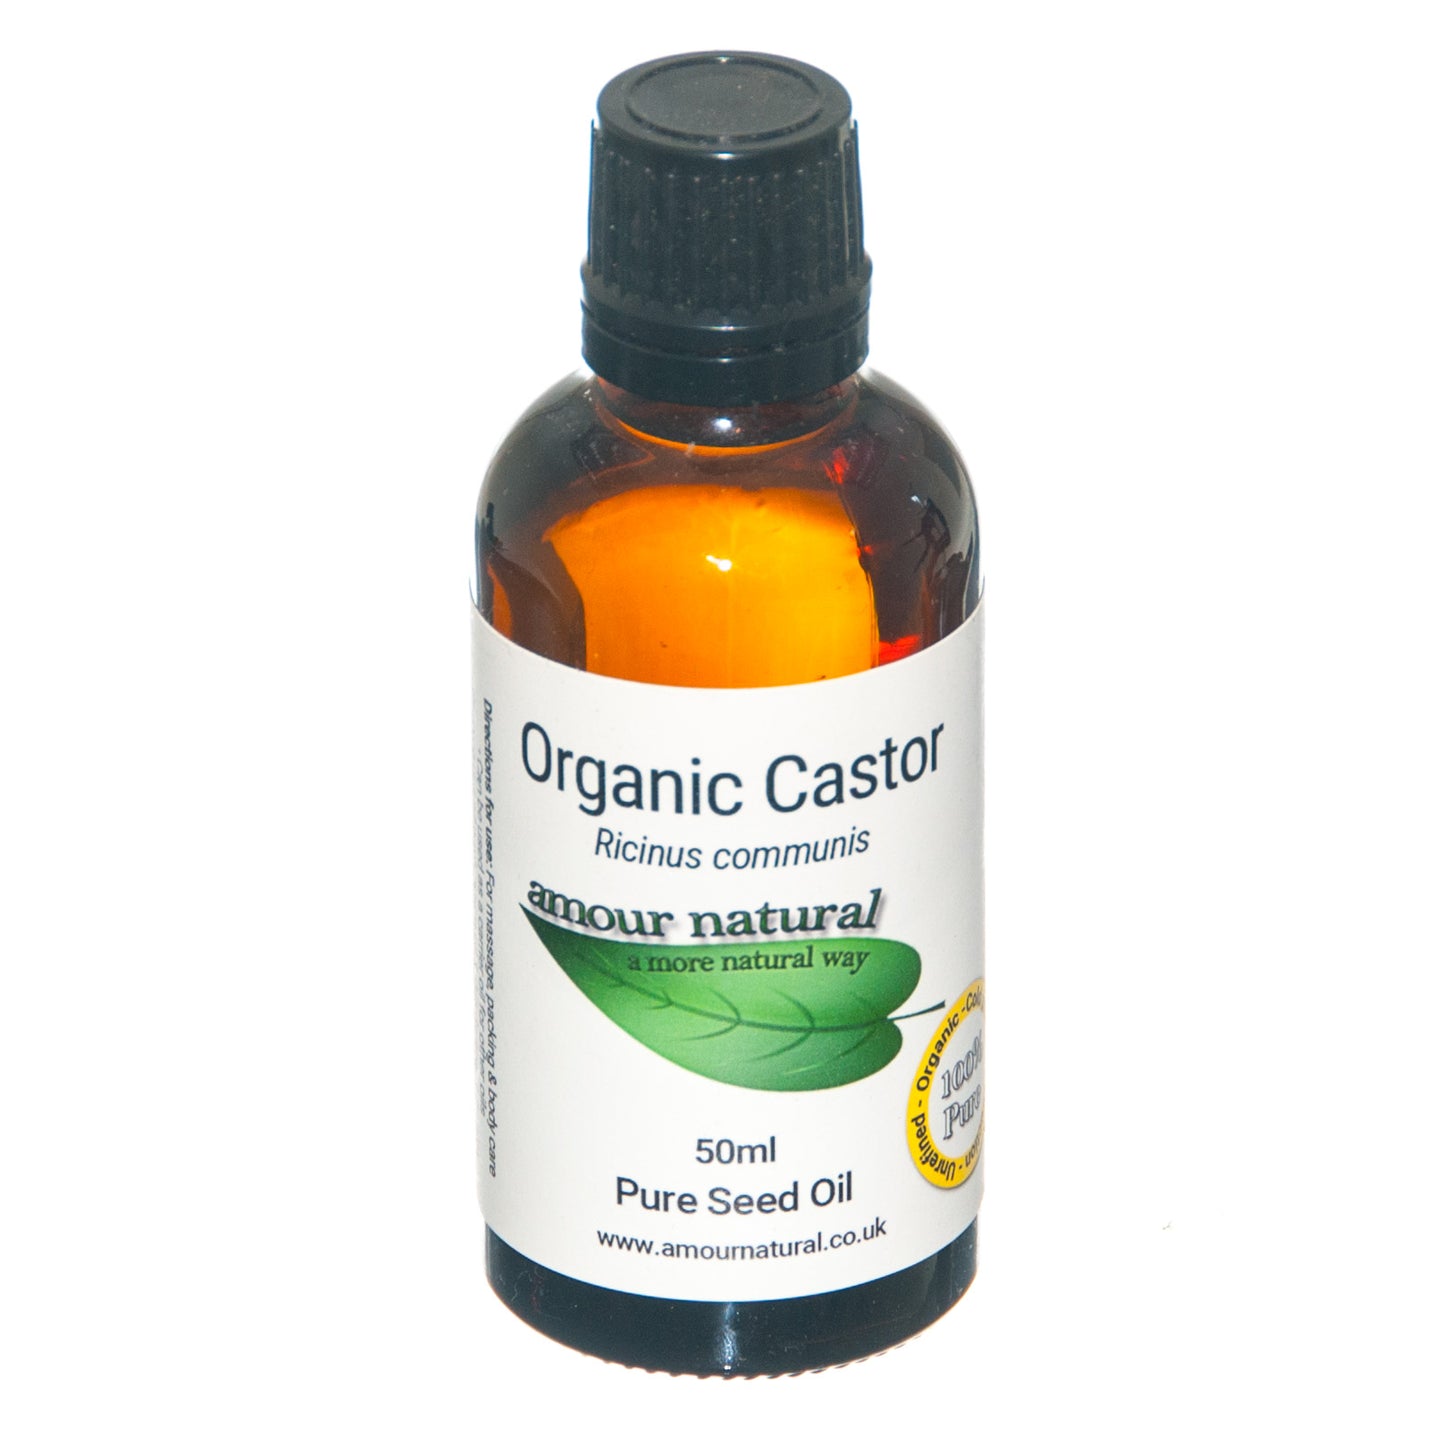 Amour Organic Castor Pure Seed Oil 50ml